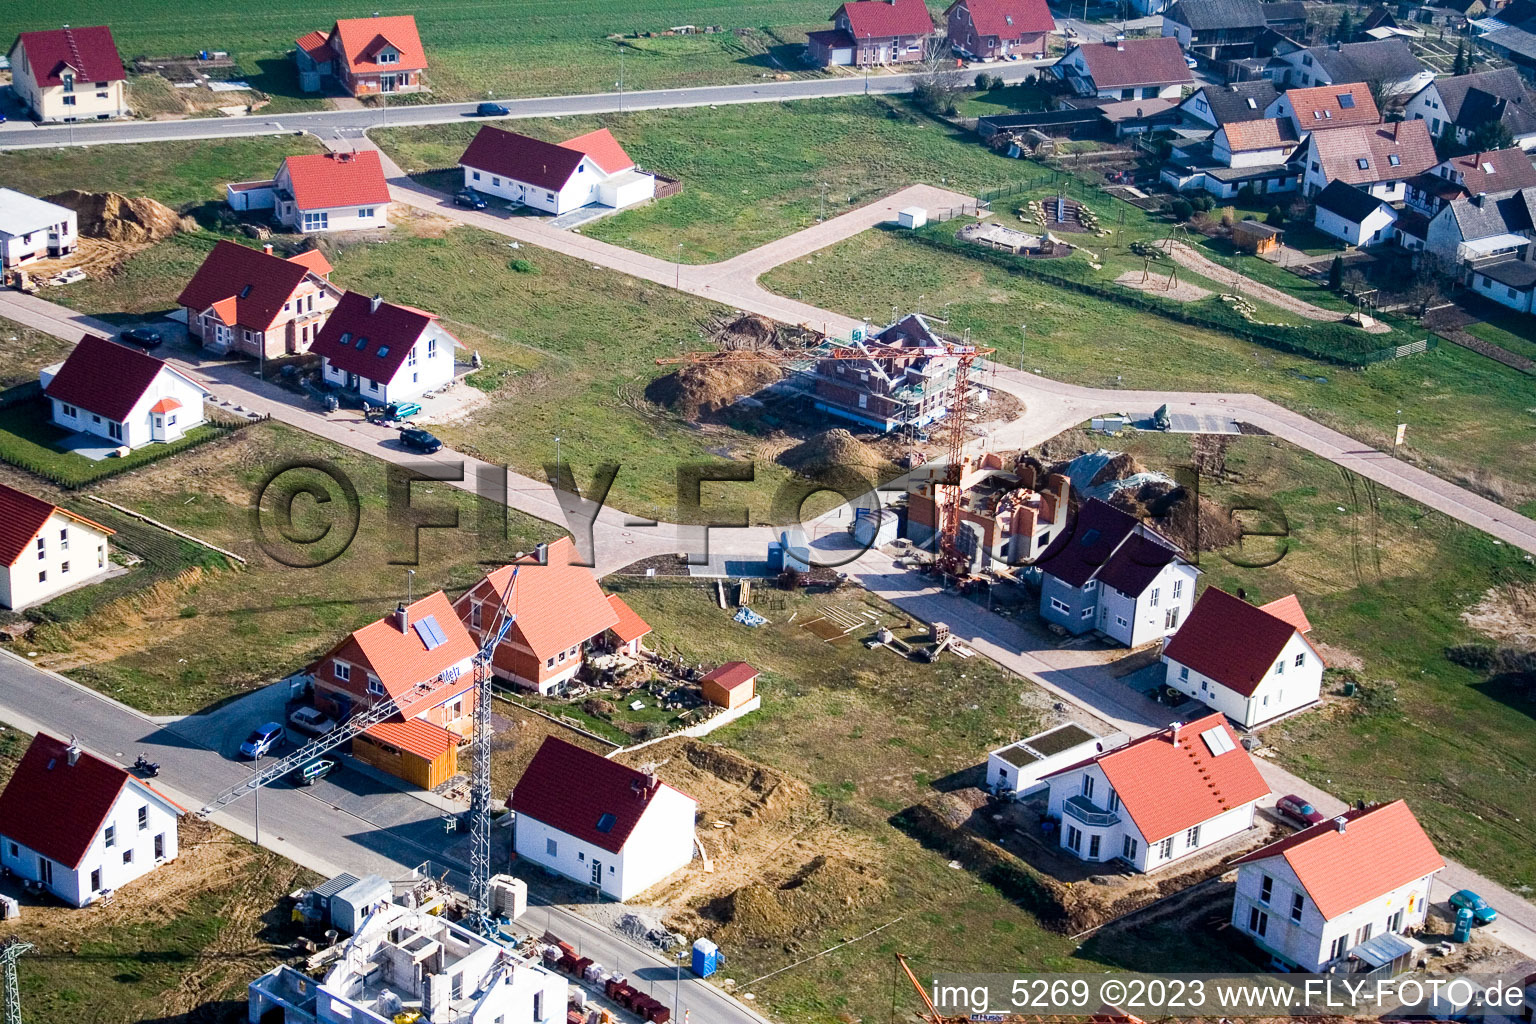 New development area NE in the district Schaidt in Wörth am Rhein in the state Rhineland-Palatinate, Germany out of the air